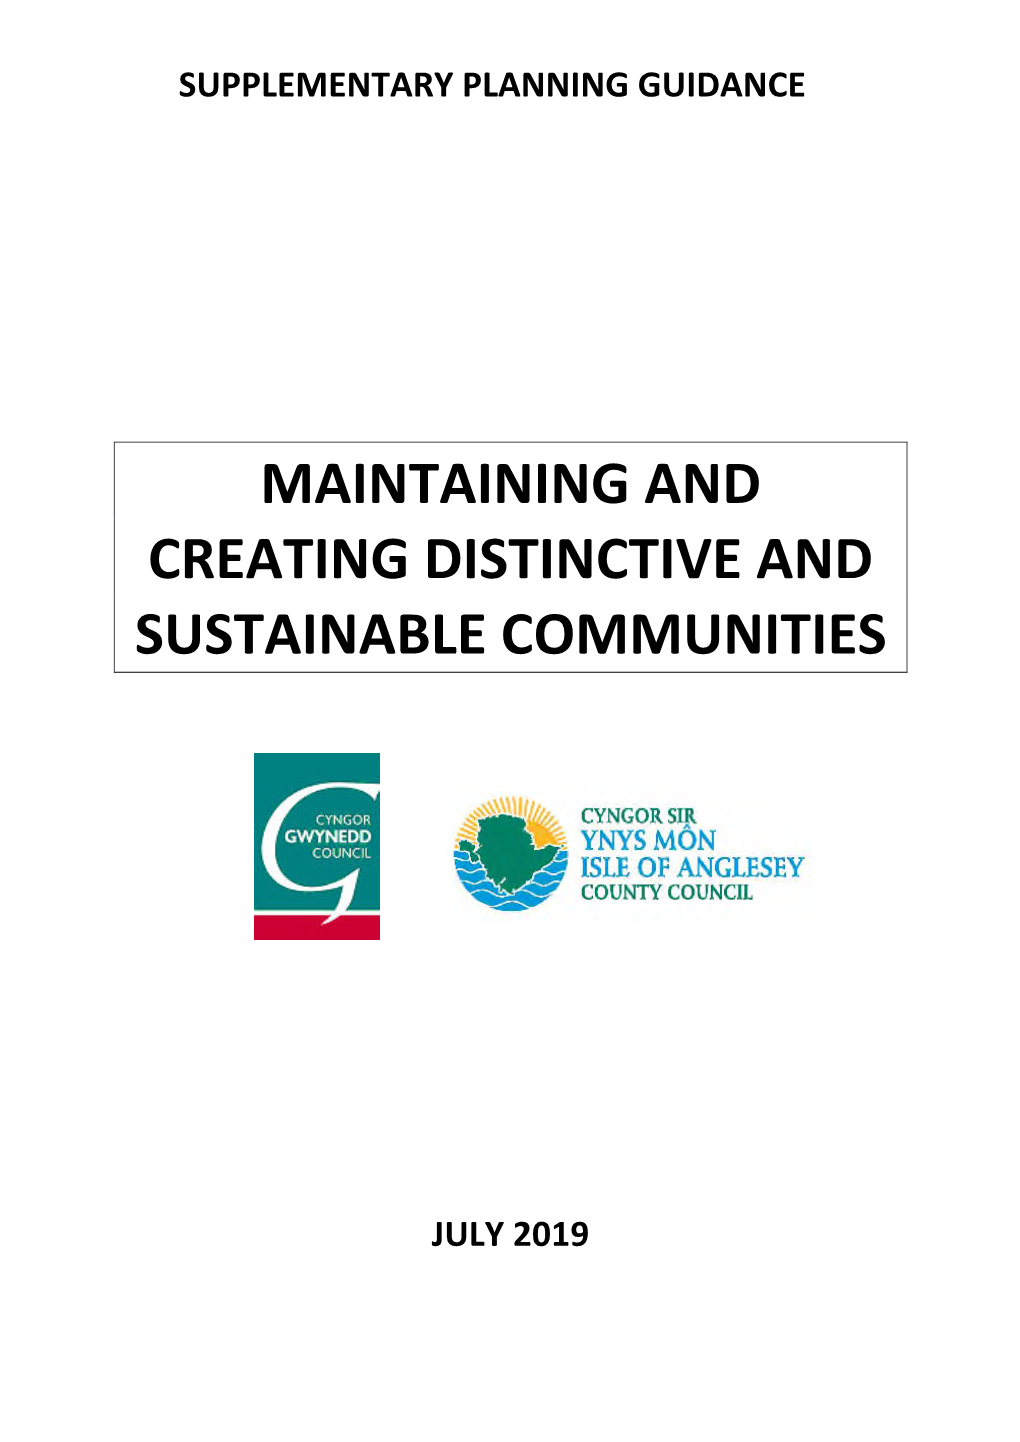 Maintaining and Creating Distinctive and Sustainable Communities